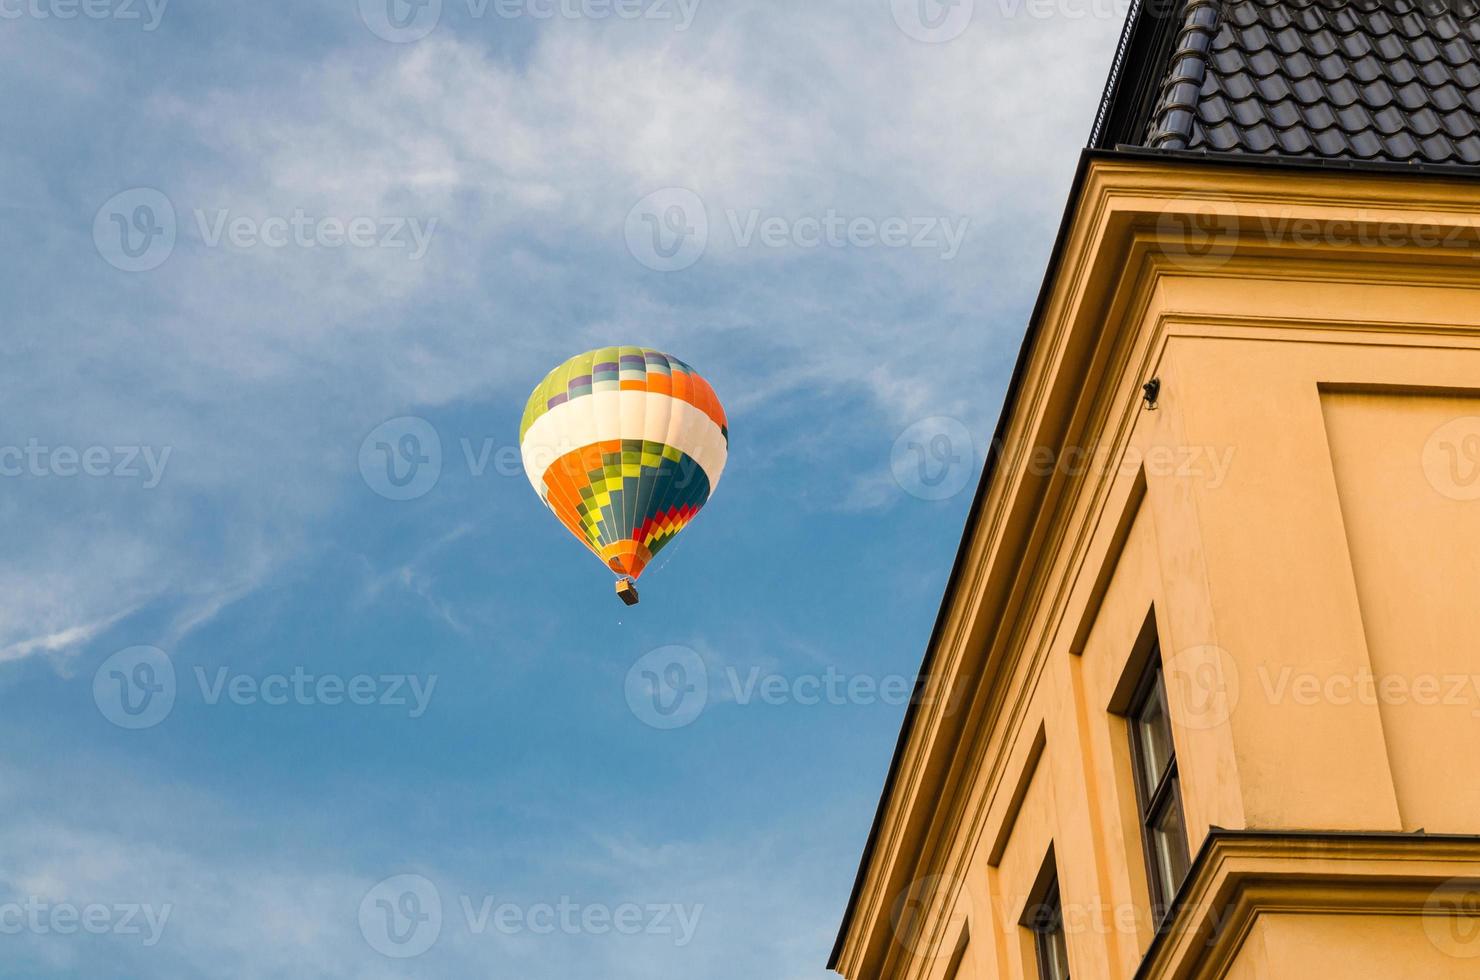 Colorful hot air balloon in blue sky, Stockholm, Sweden photo